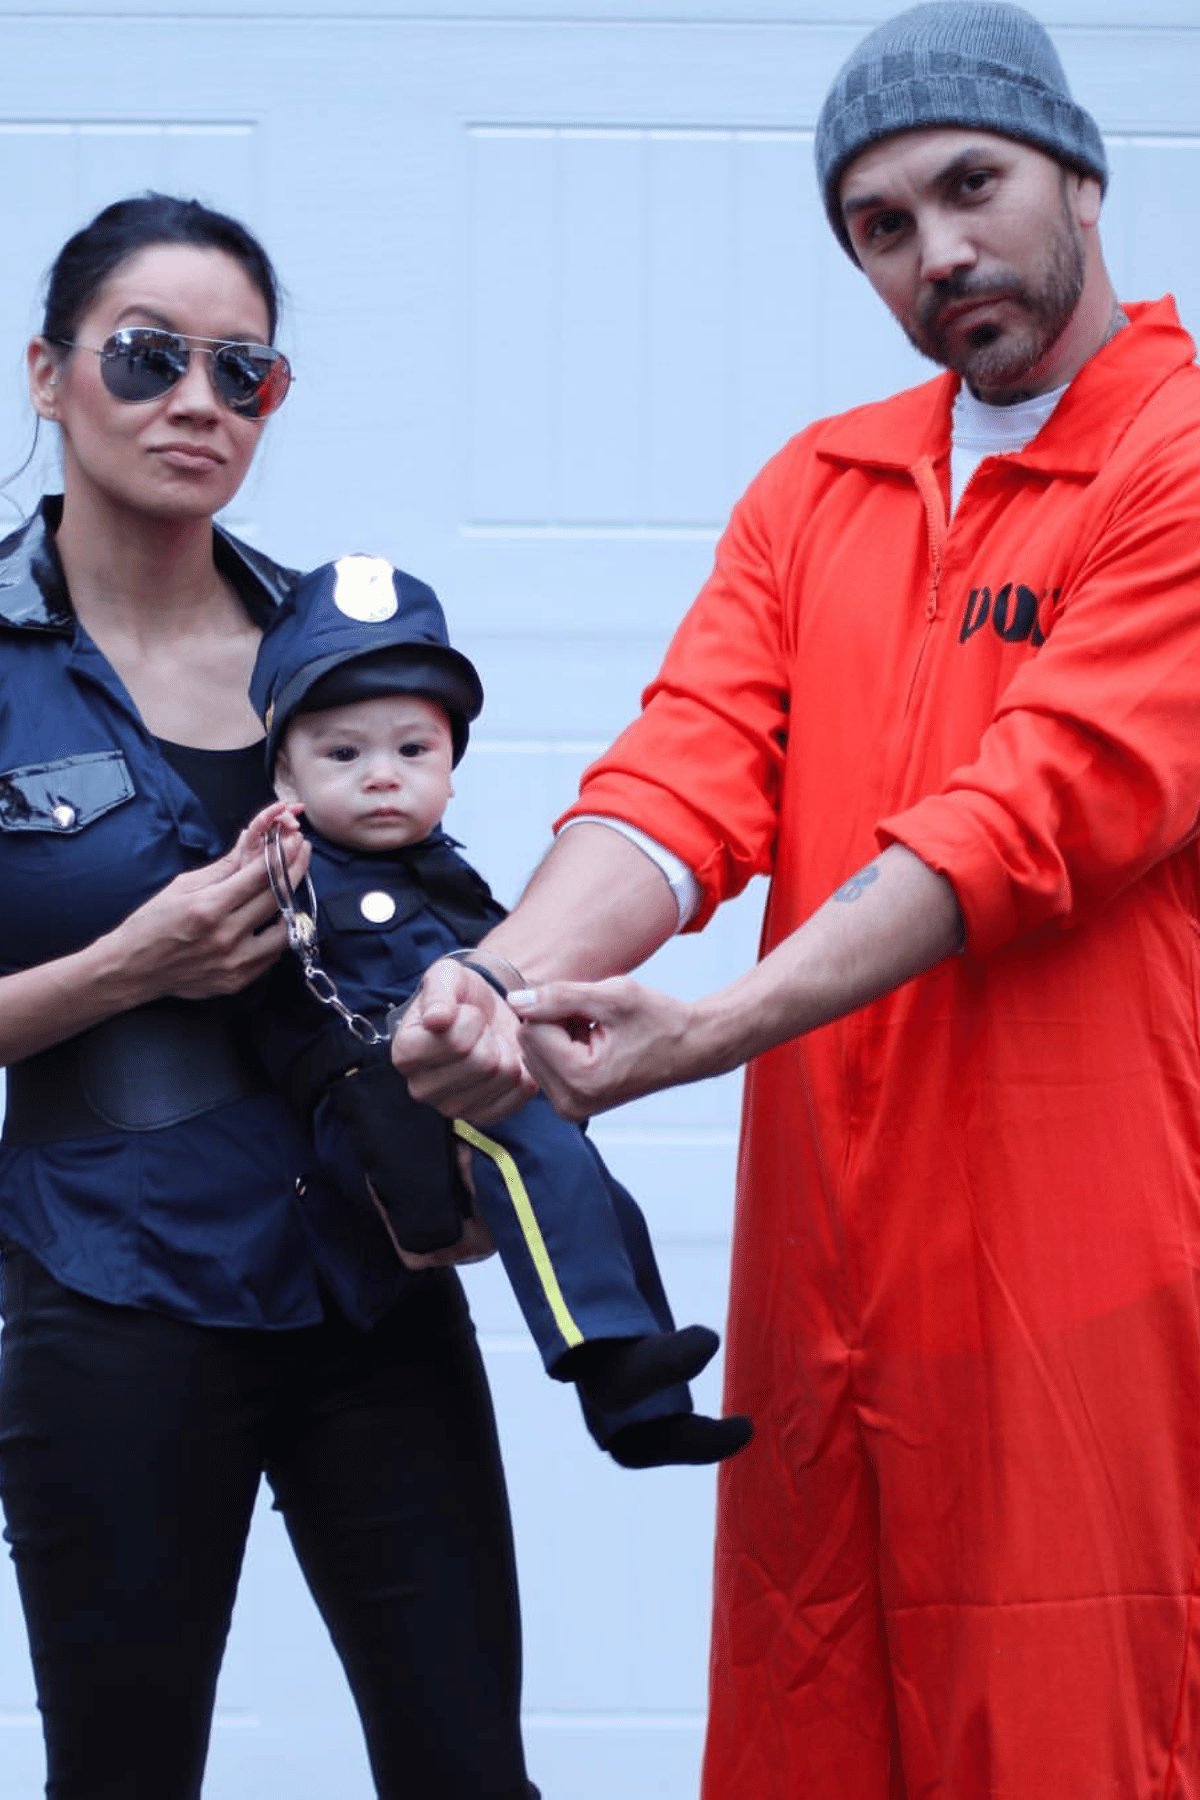 Mom and baby as cops, dad as a convict